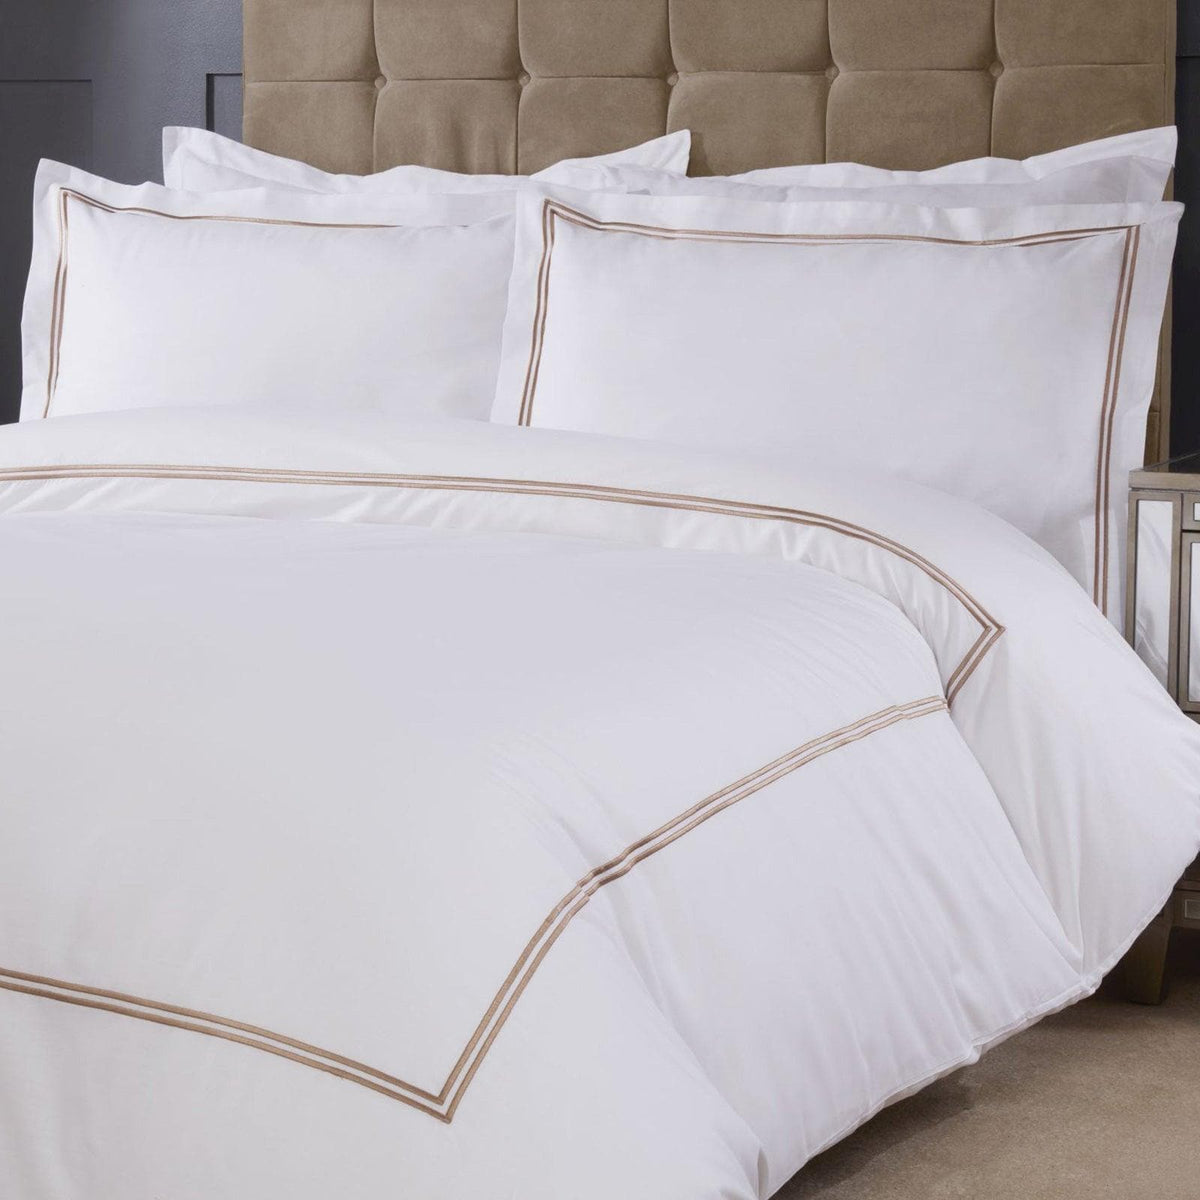 Mayfair Classic Embroidered Border White And Taupe Duvet Cover Set Ideal Textiles 